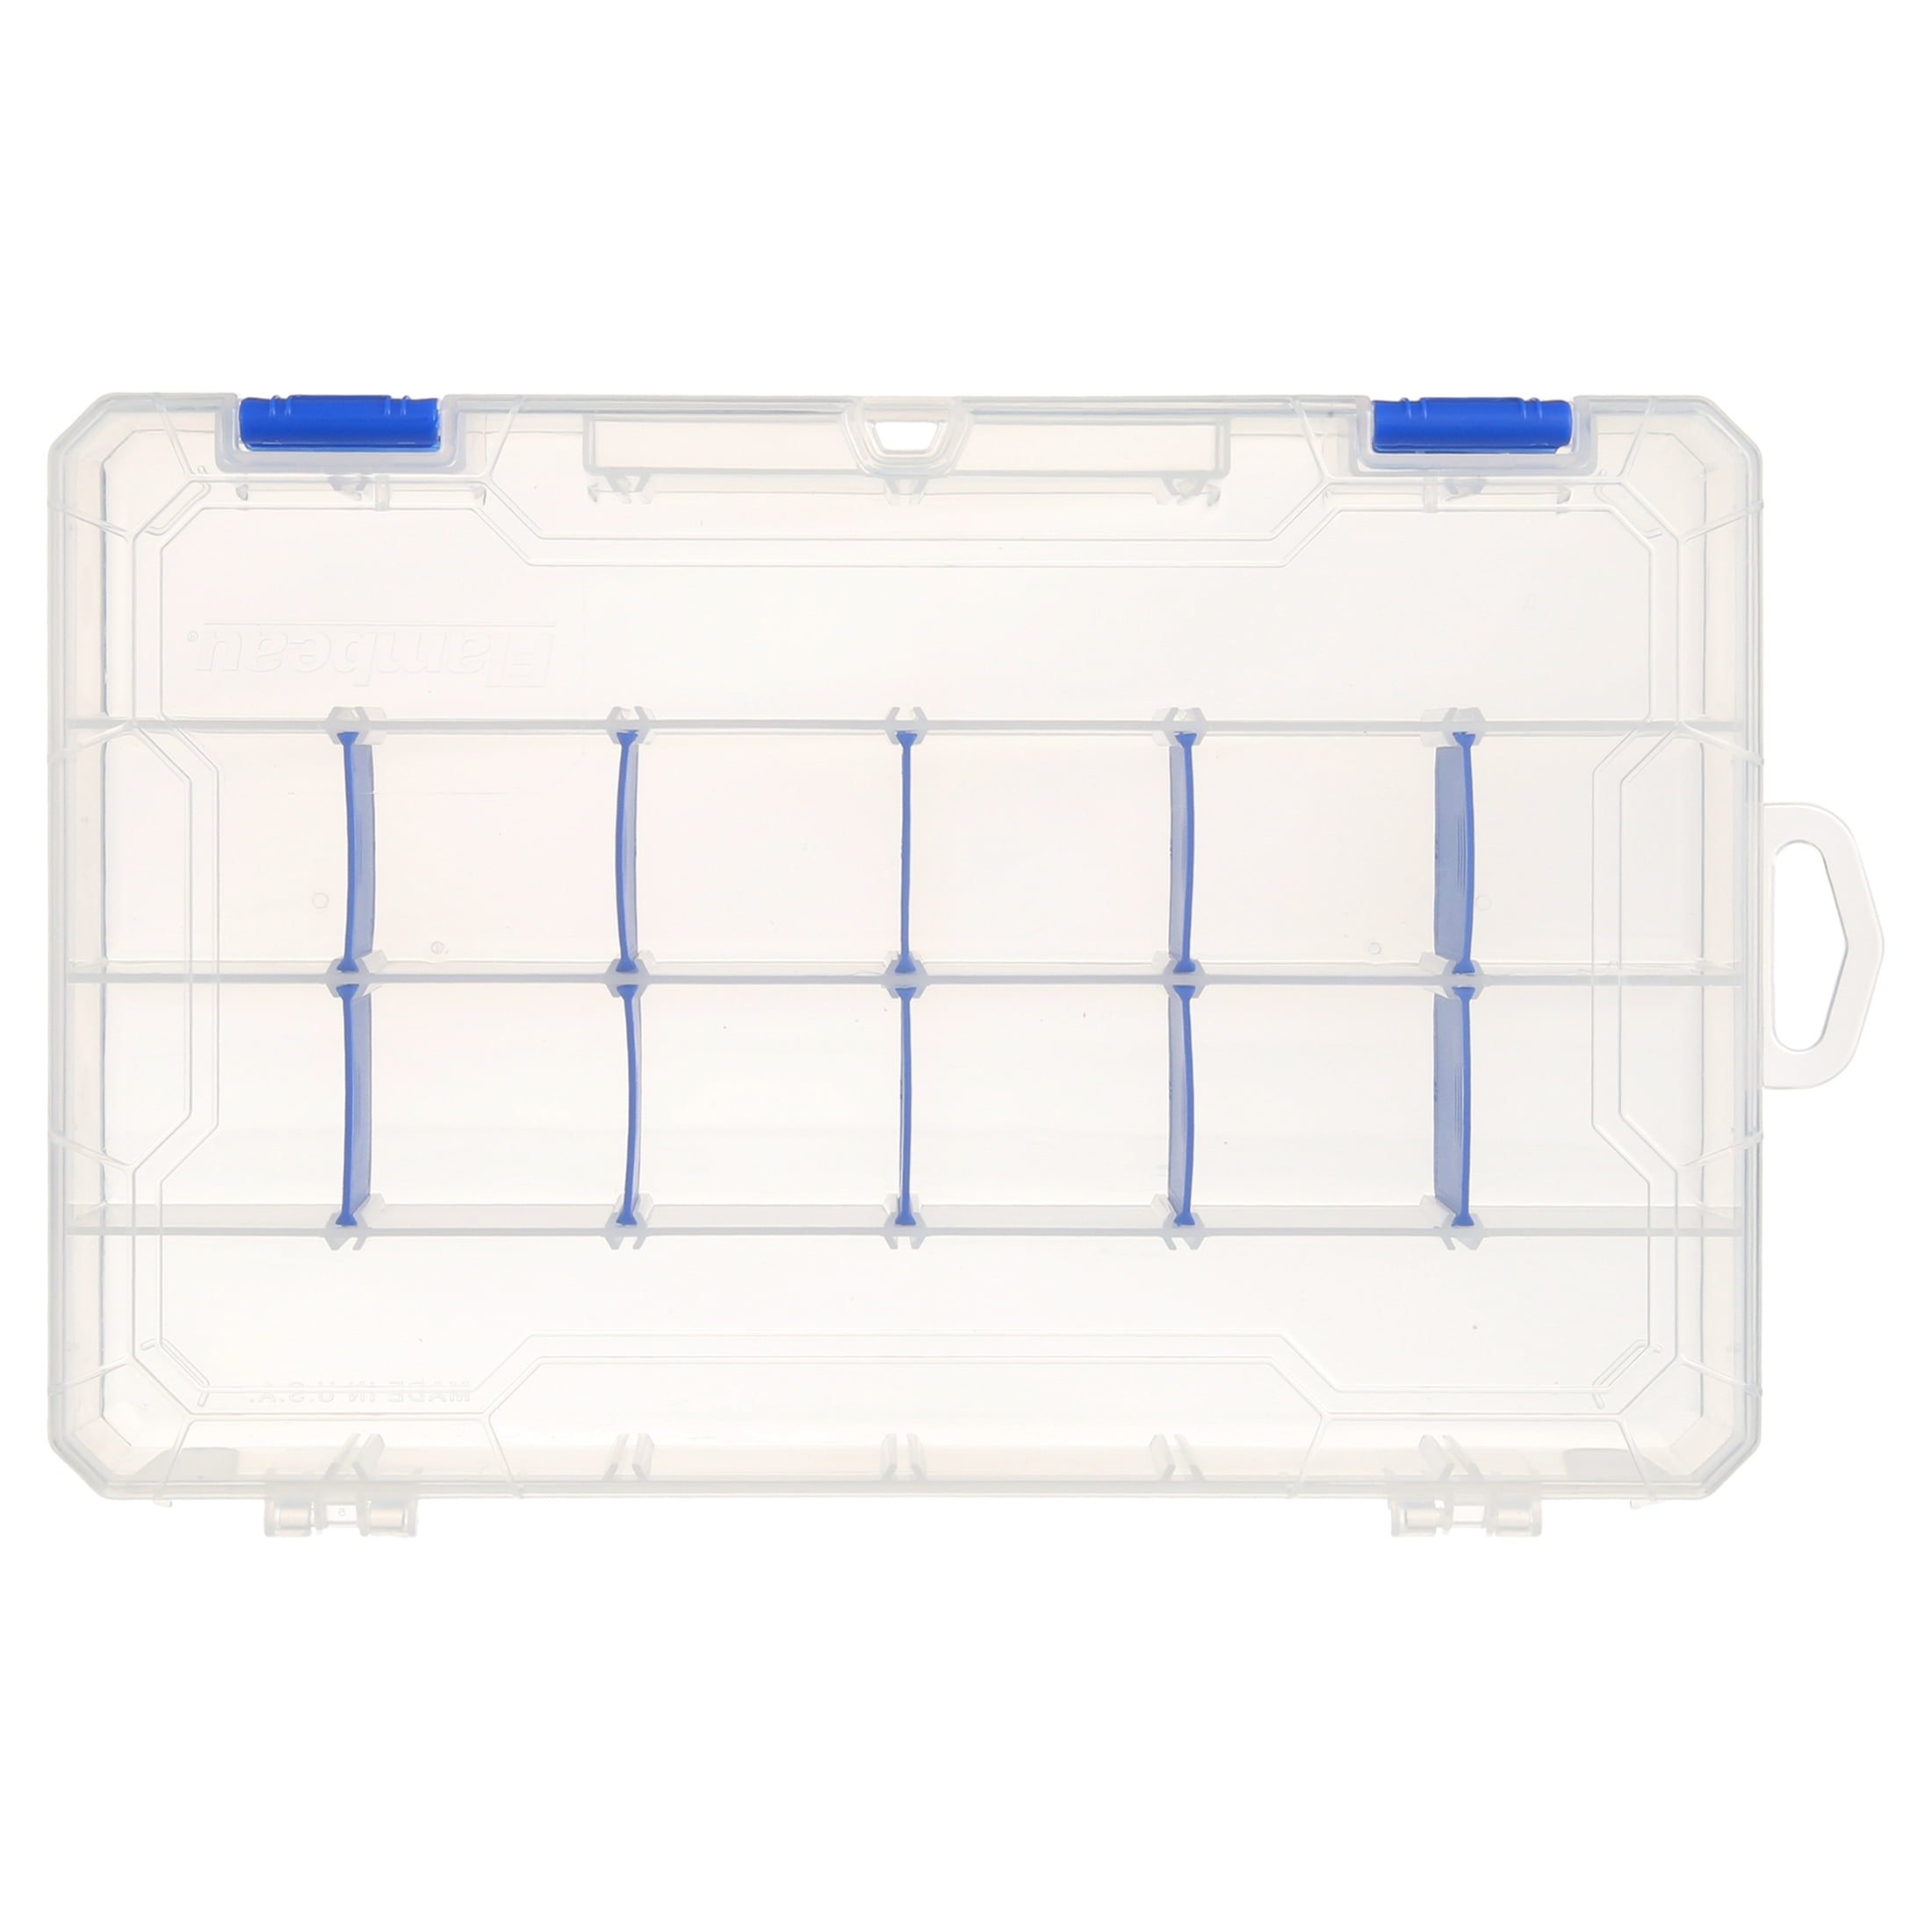 Flambeau Outdoors, 4007 Tuff Trainer, 24 Compartments, 6 Pack, Clear, 11  inches, Fishing Tackle Box 